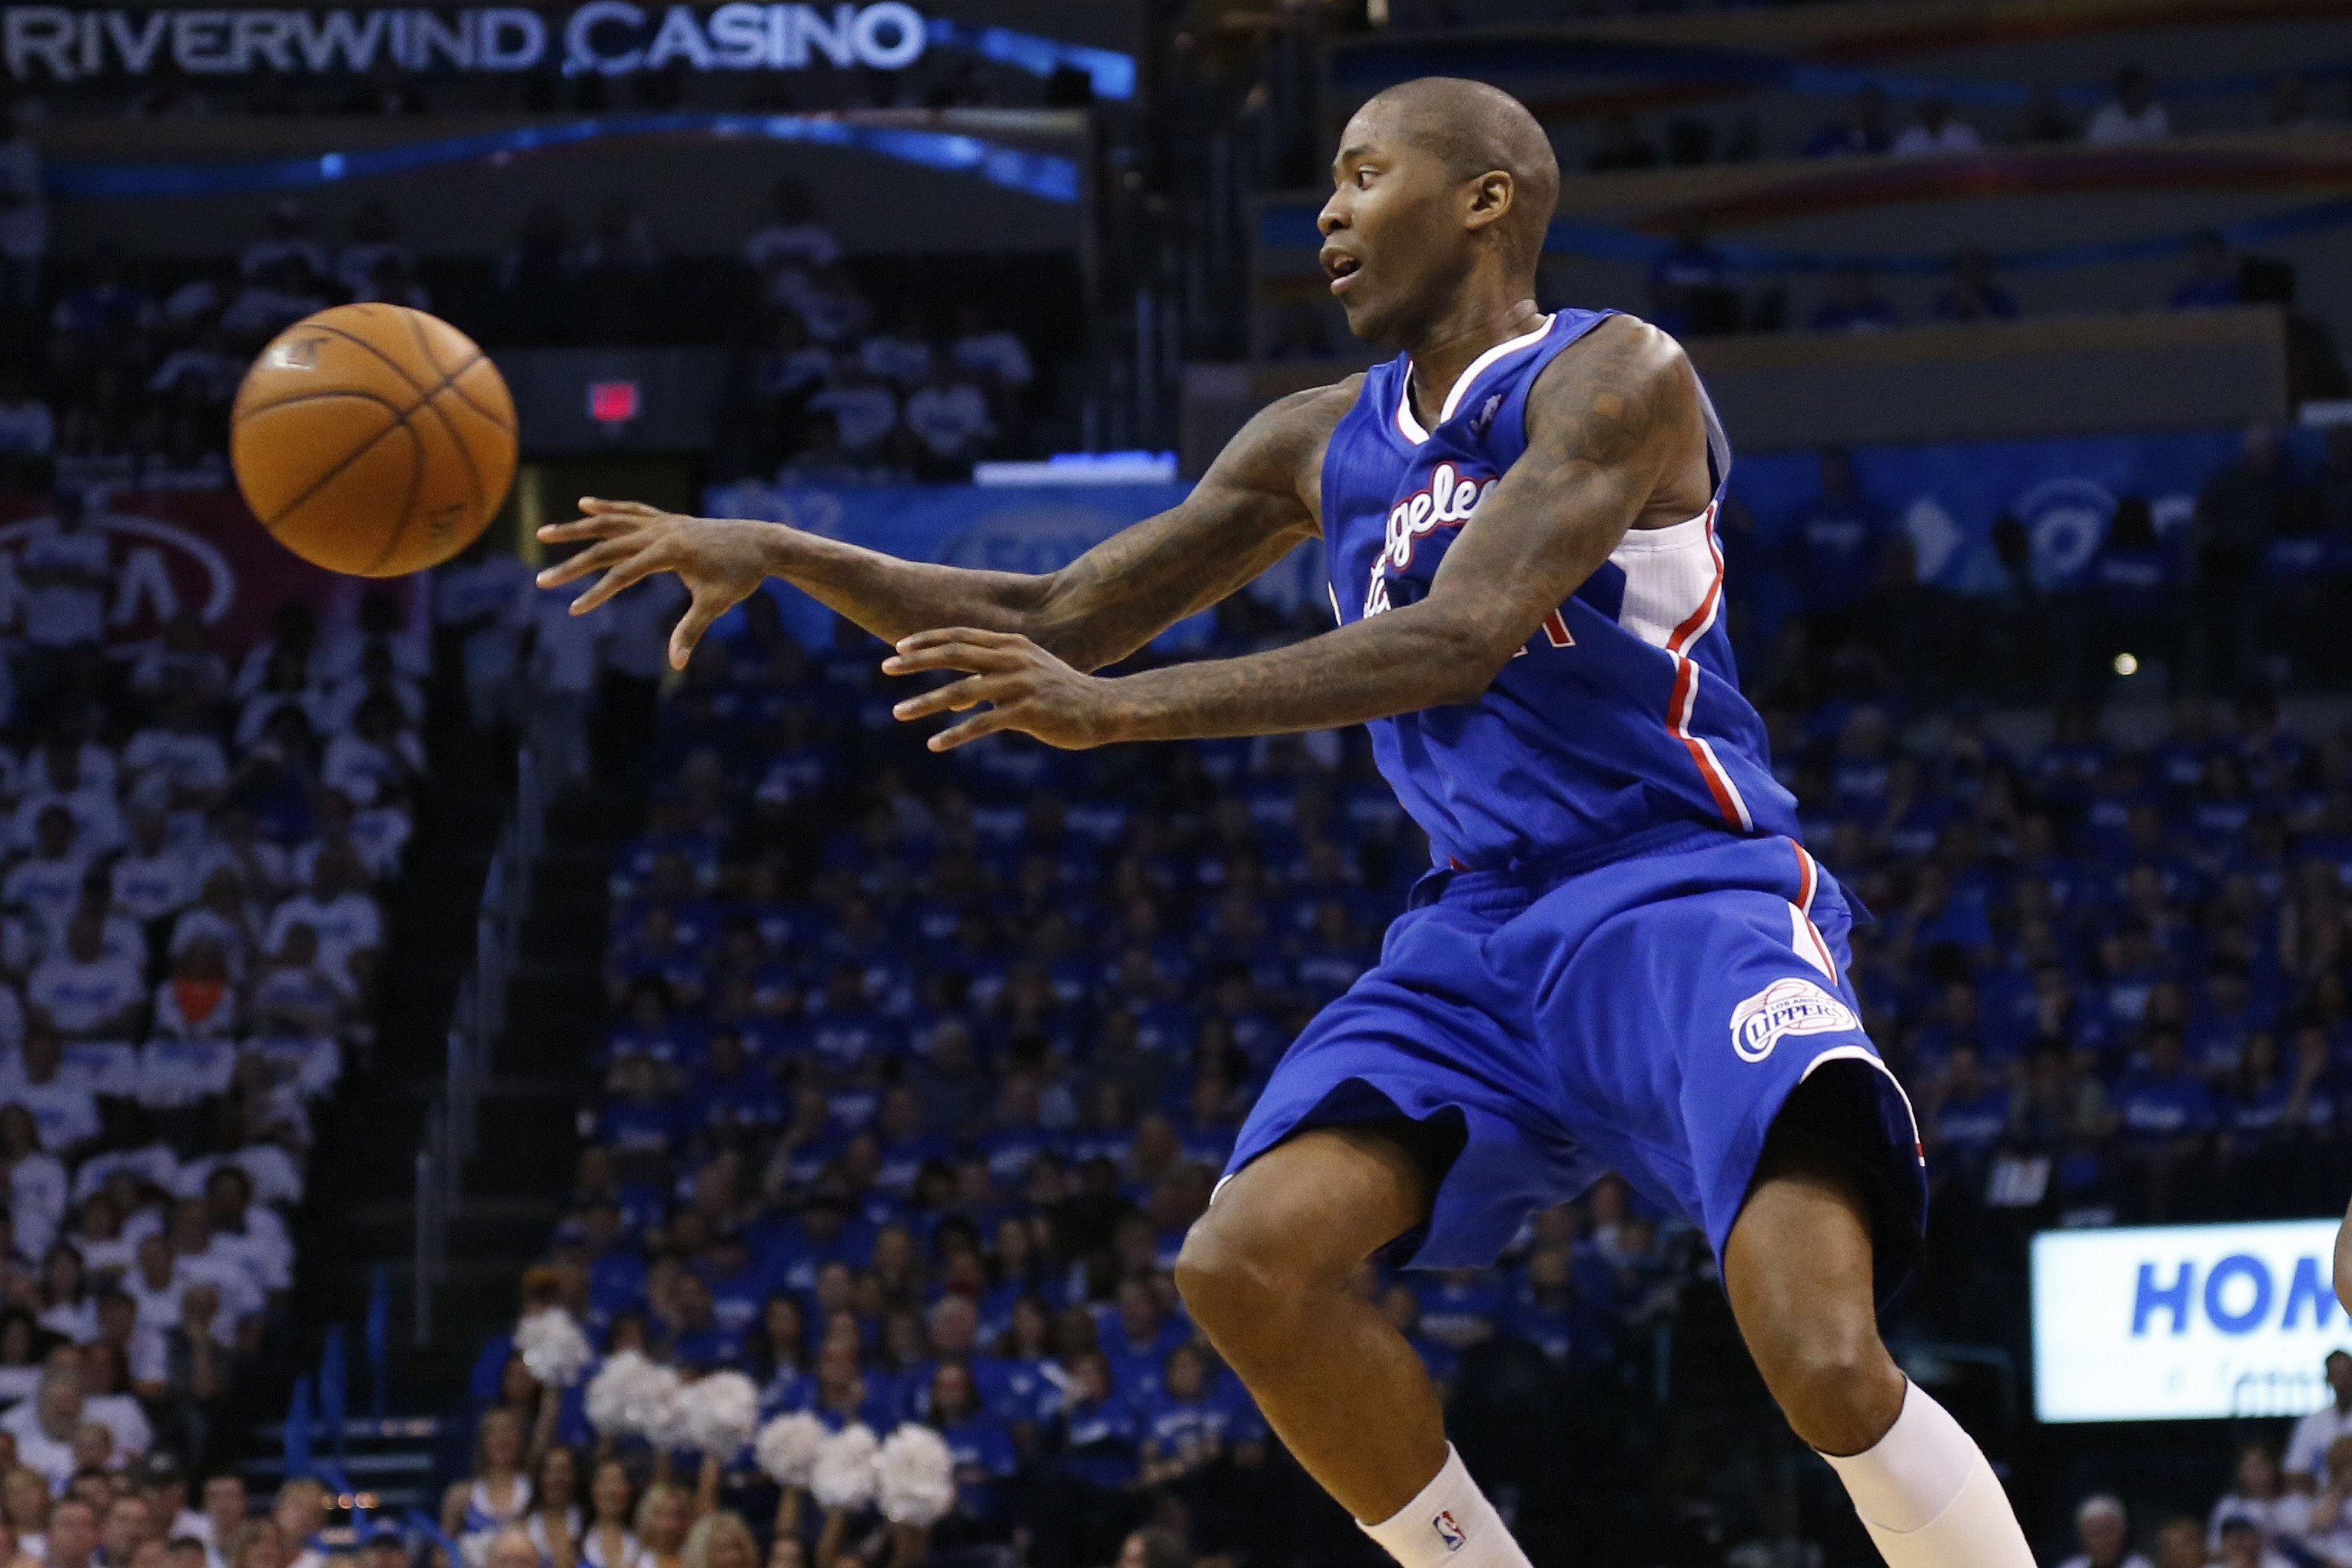 Jamal Crawford scores 25 points, takes over in Clippers' win over